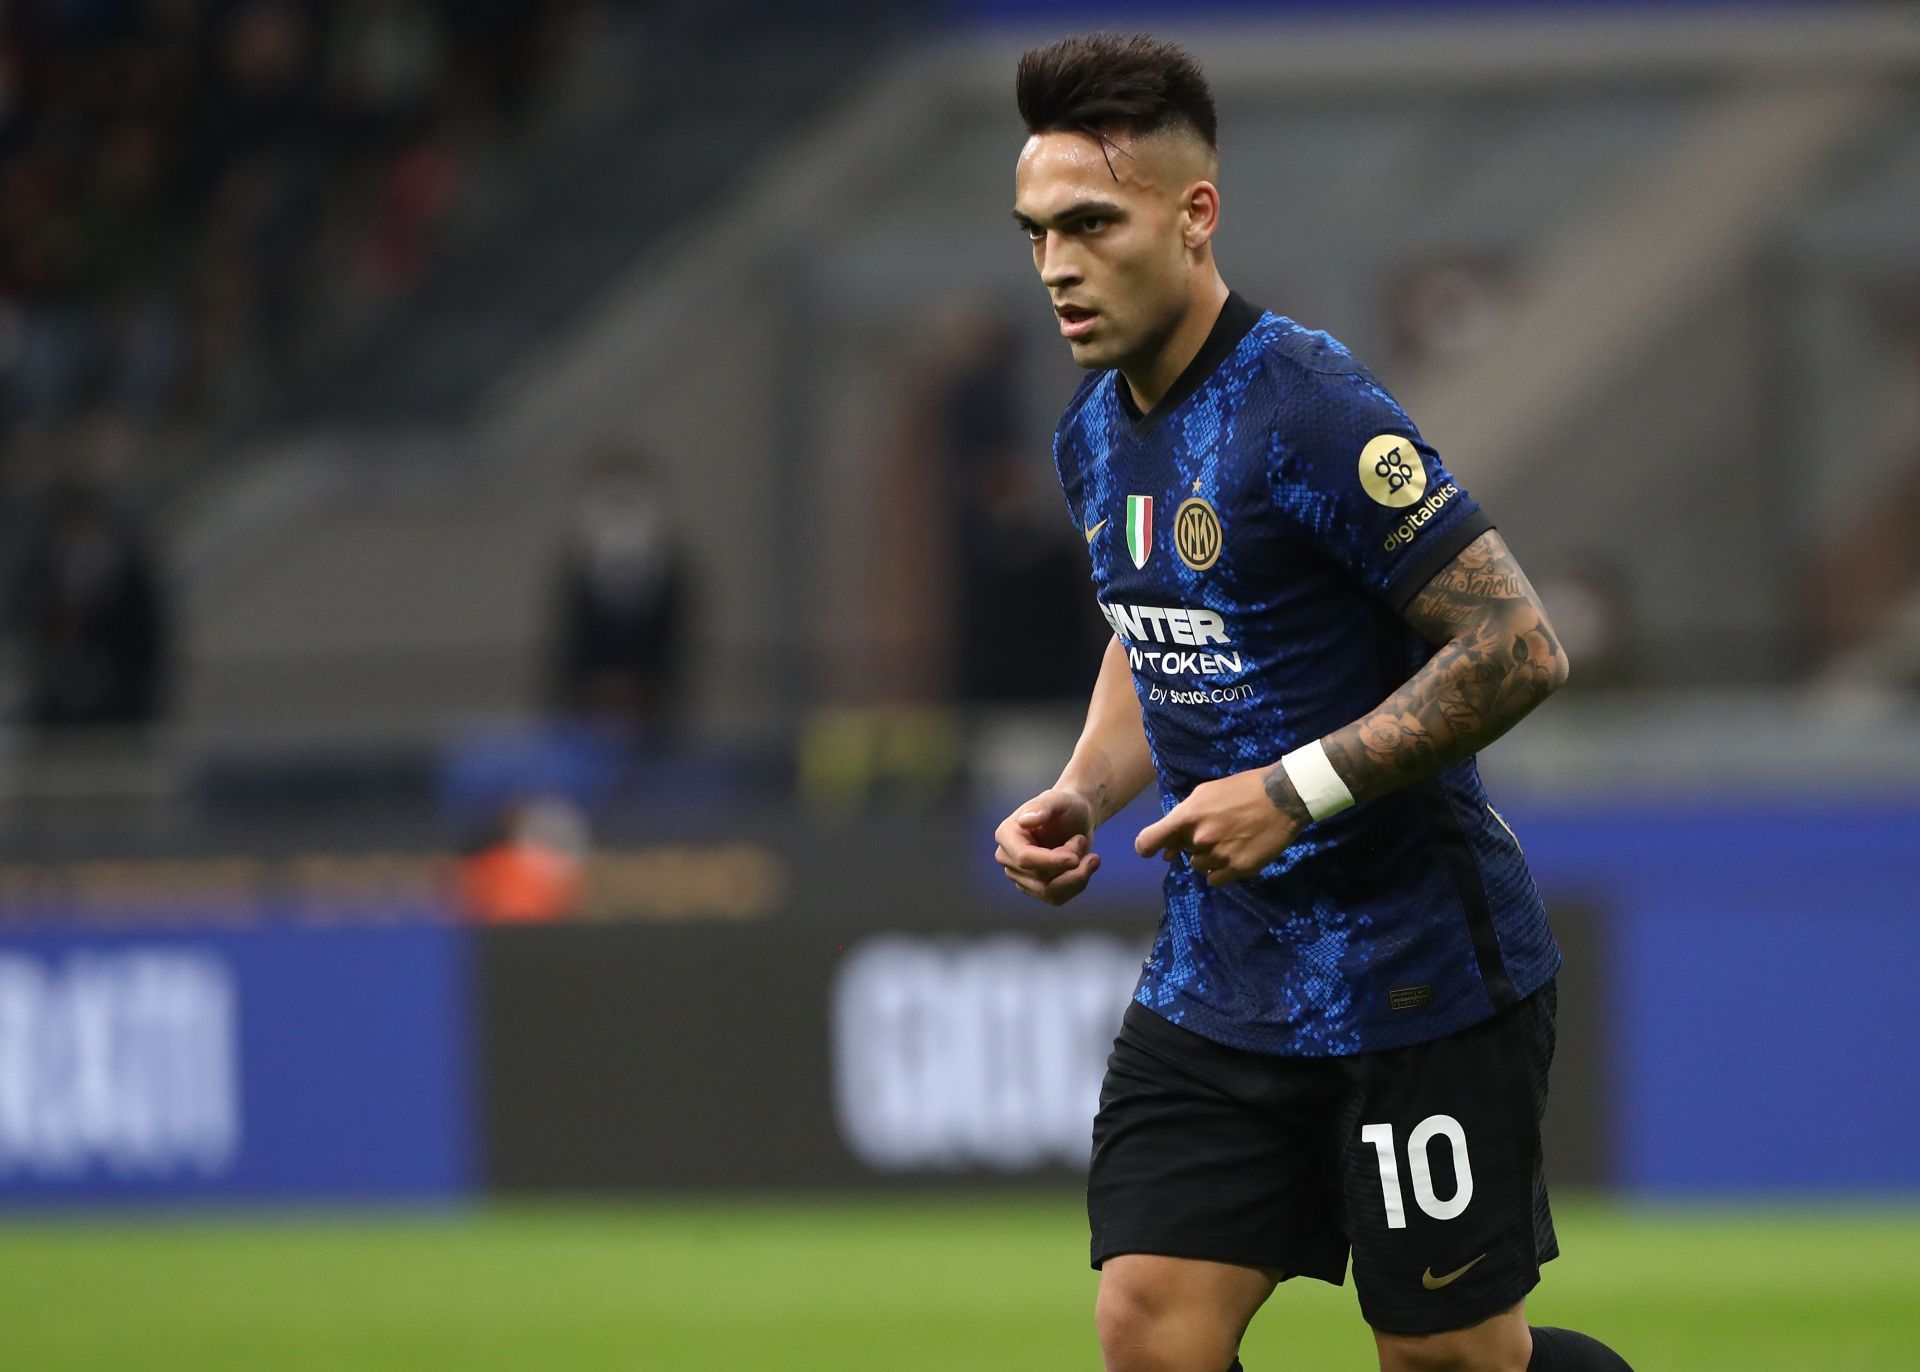 Inter Milan play Genoa on Friday in Serie A